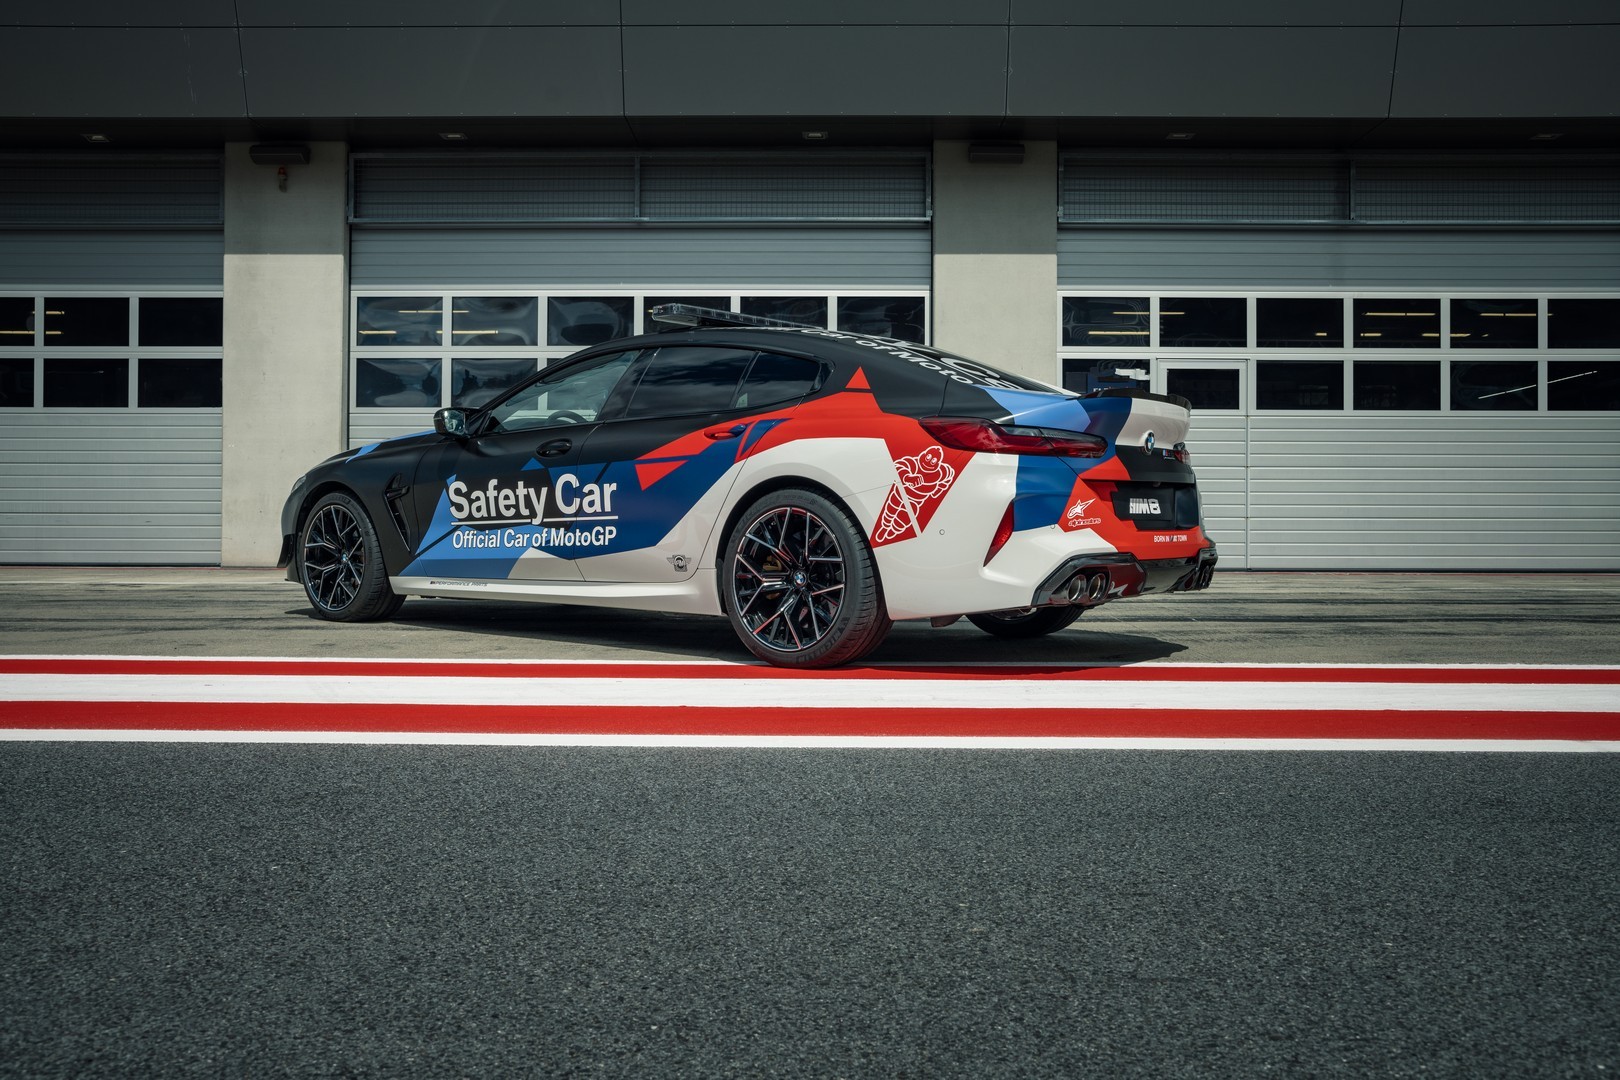 2019 - [BMW] Série 8 Gran Coupé [G16] - Page 7 Bmw-surprisingly-turned-the-new-m8-gran-coupe-into-a-safety-car-for-motogp_6